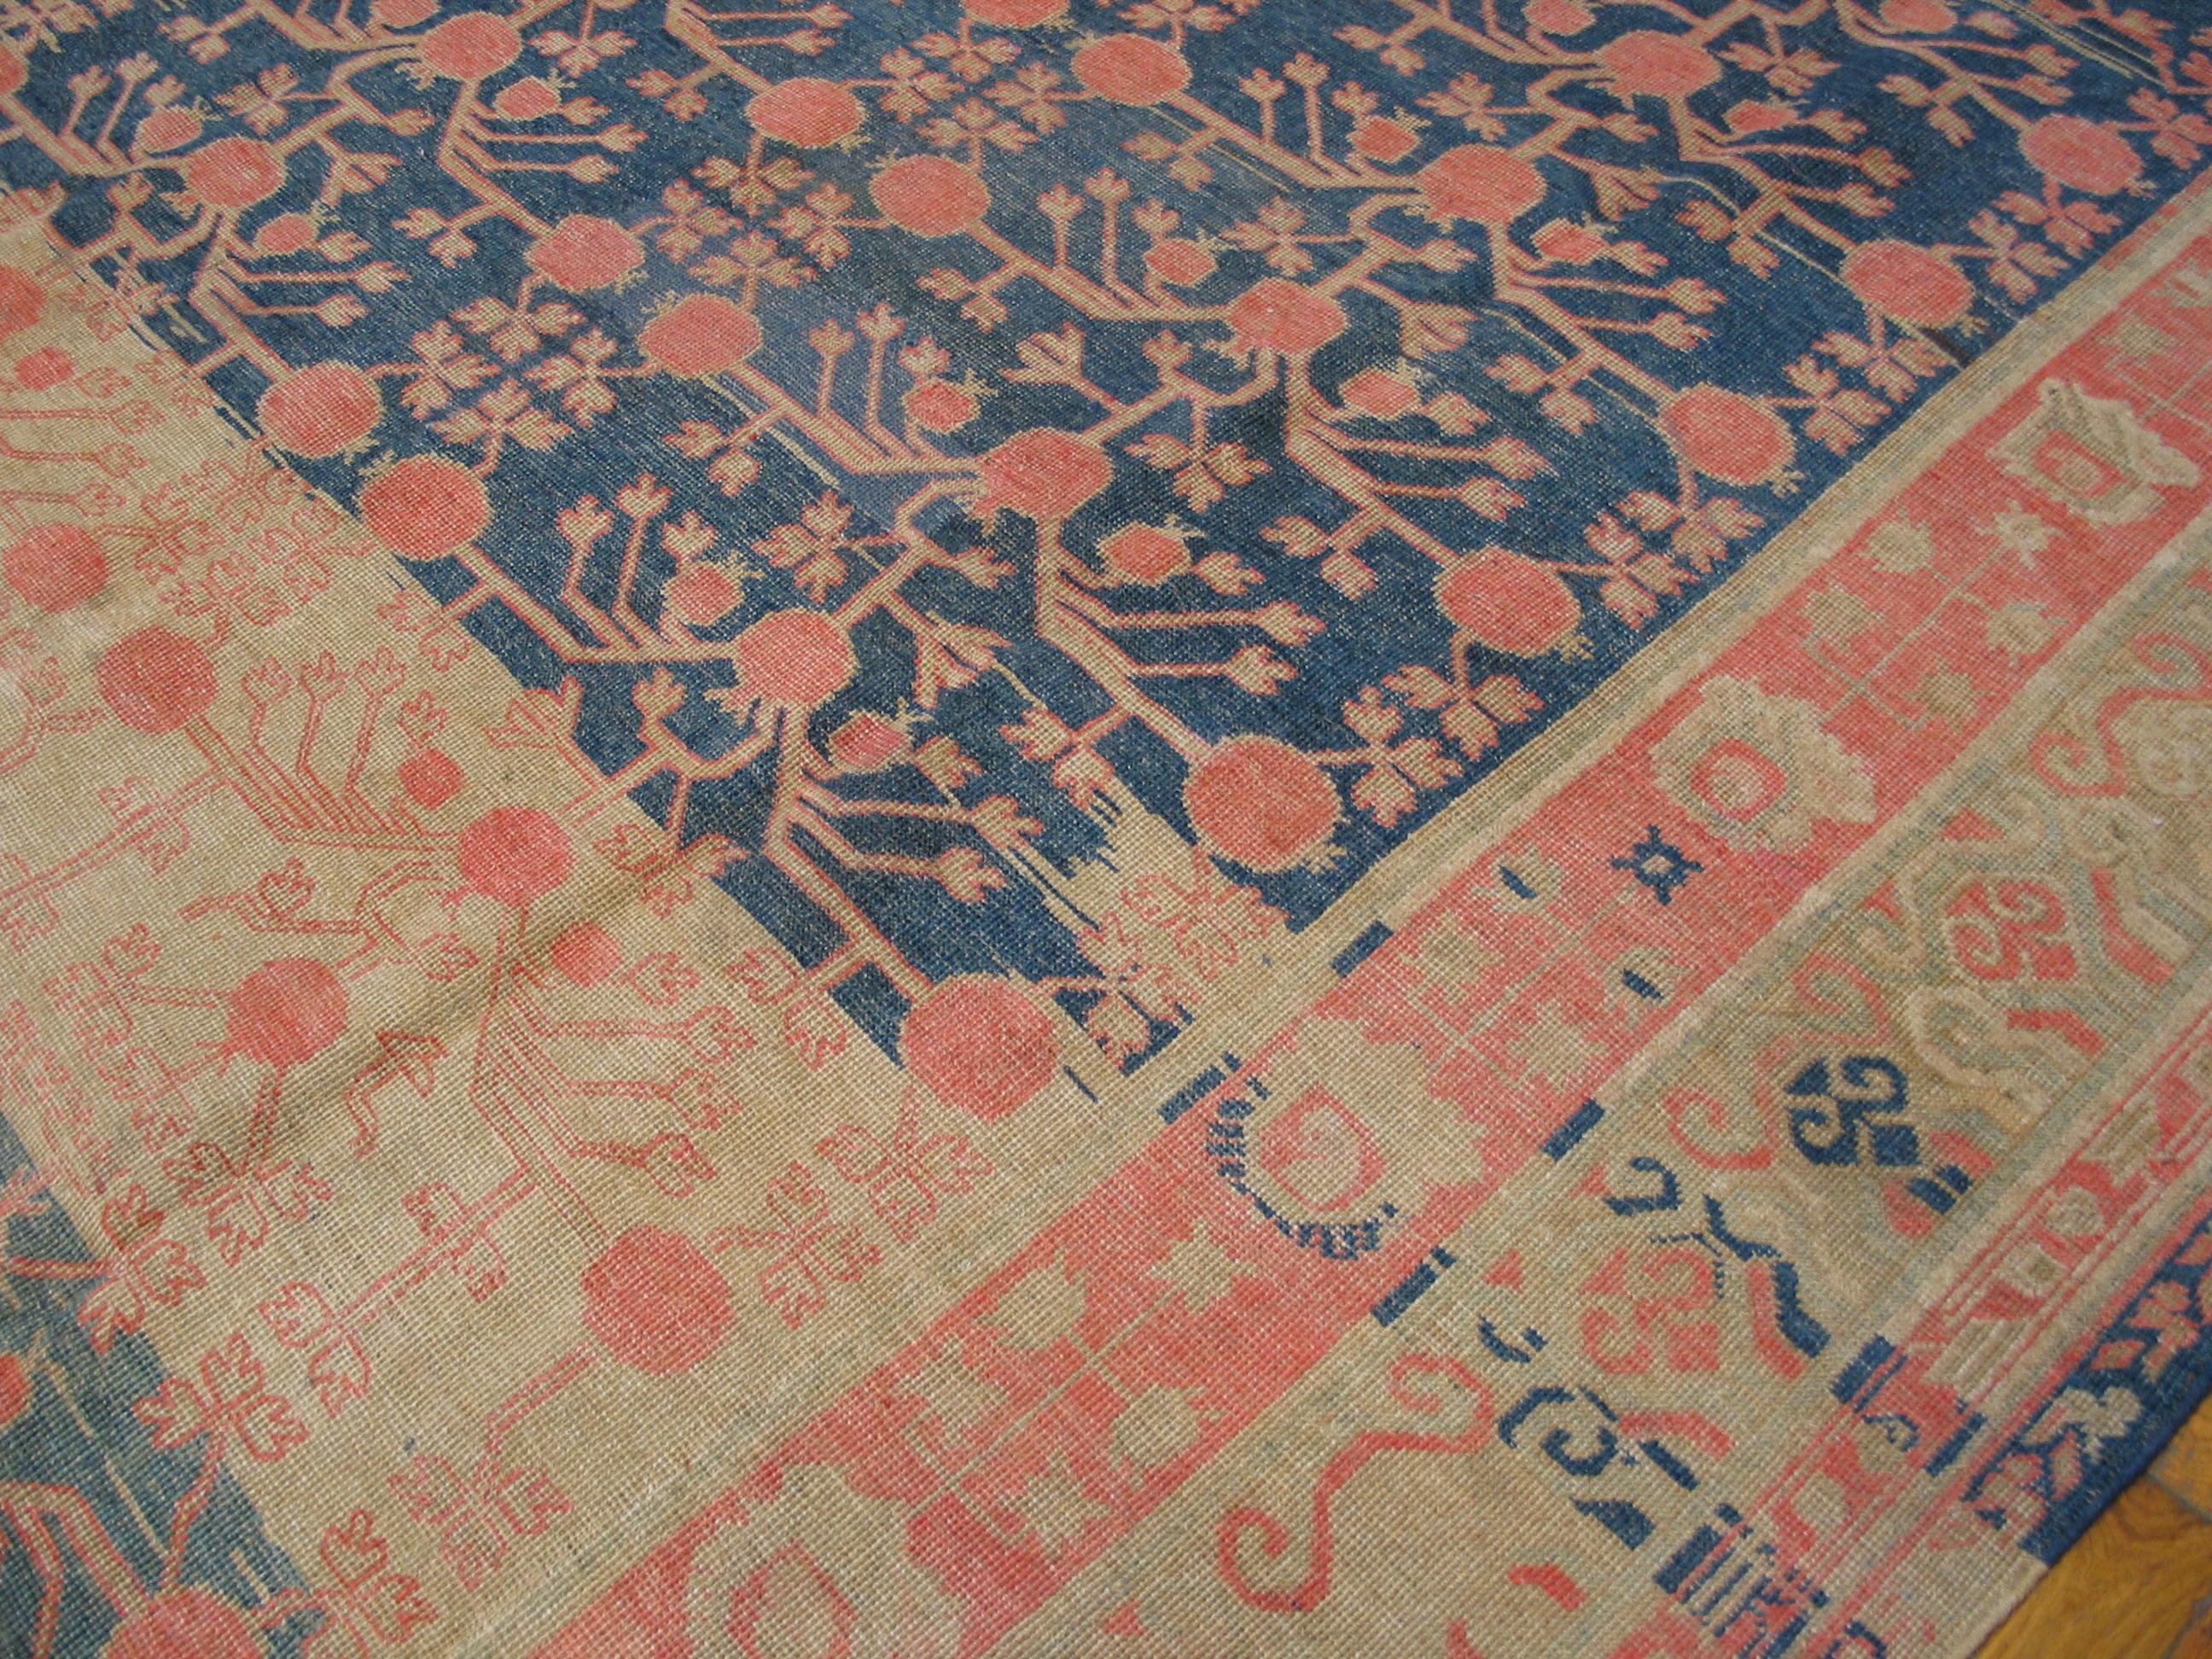 Wool Early 20th Century Central Asian Khotan Carpet ( 7'4